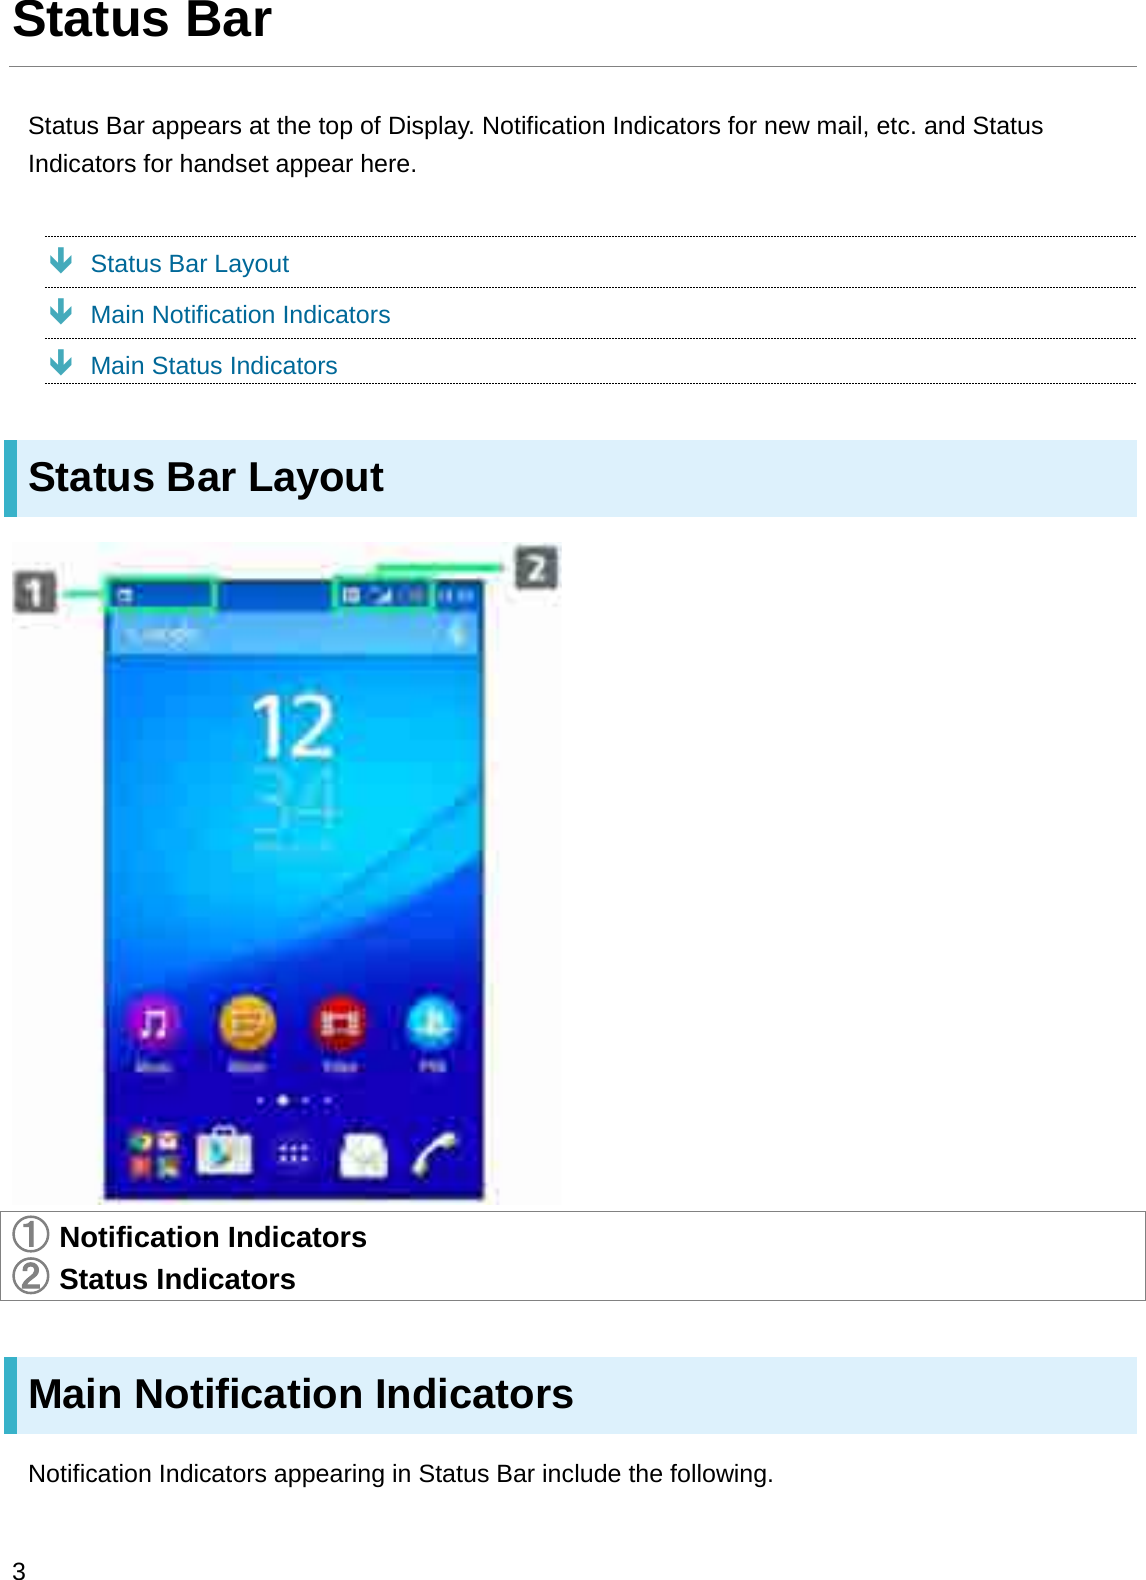 Status BarStatus Bar appears at the top of Display. Notification Indicators for new mail, etc. and Status Indicators for handset appear here.ÐStatus Bar LayoutÐMain Notification IndicatorsÐMain Status IndicatorsStatus Bar Layout䐟Notification Indicators䐠Status IndicatorsMain Notification IndicatorsNotification Indicators appearing in Status Bar include the following.3